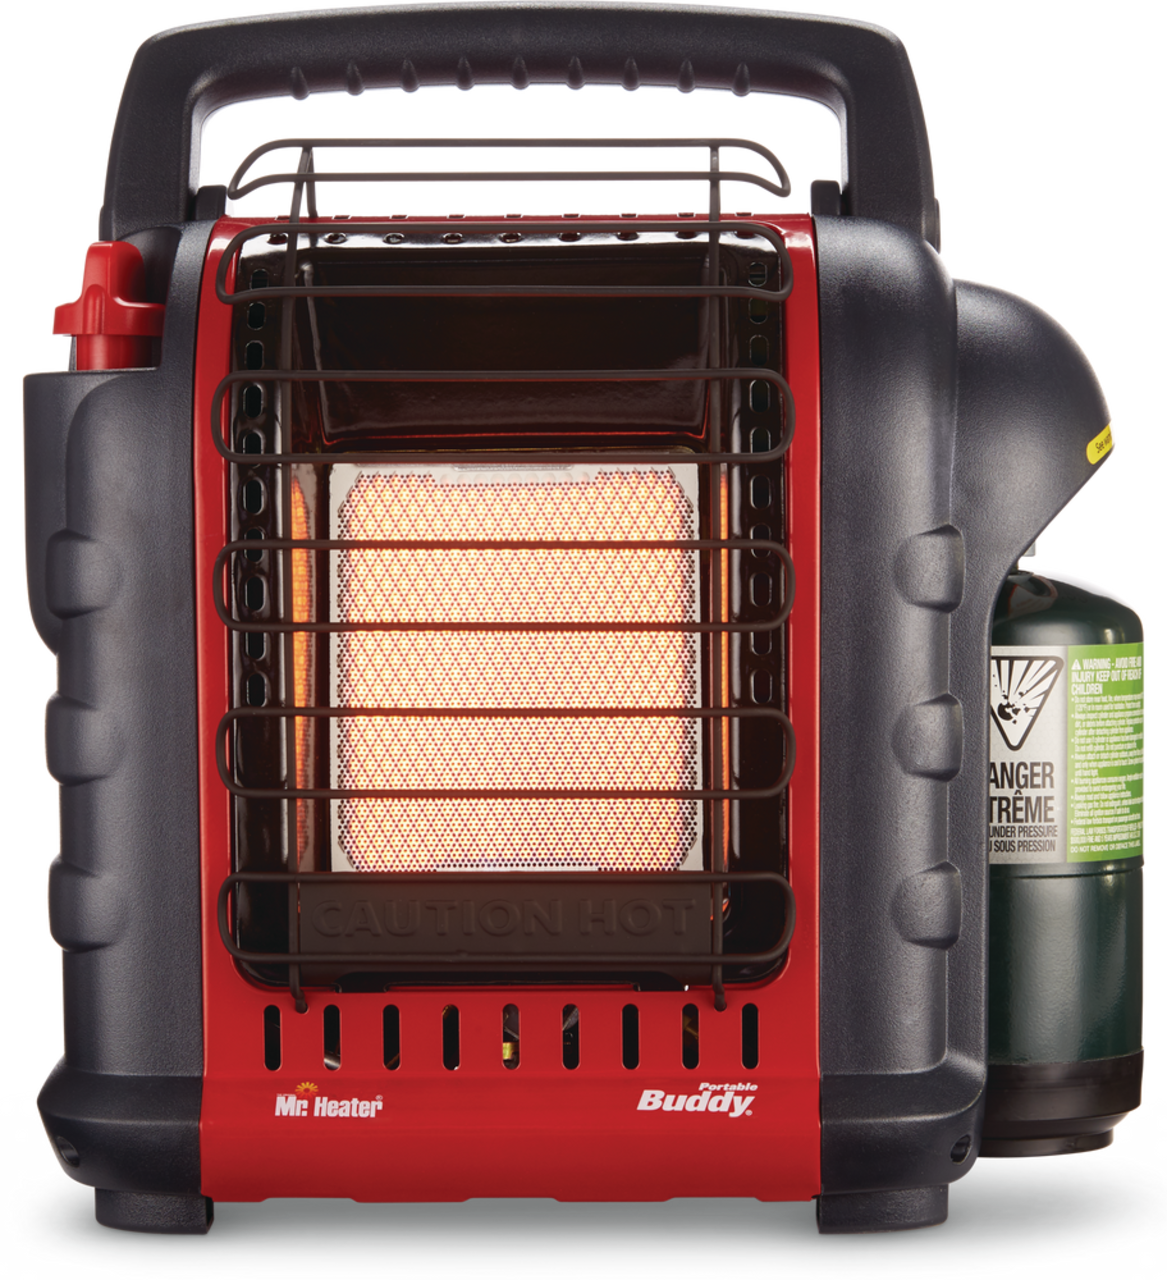 https://media-www.canadiantire.ca/product/playing/camping/camping-living/0762357/mr-heater-portable-buddy-heater-9k-9c2b155f-7e84-4cfb-bd46-9b587a191983.png?imdensity=1&imwidth=640&impolicy=mZoom